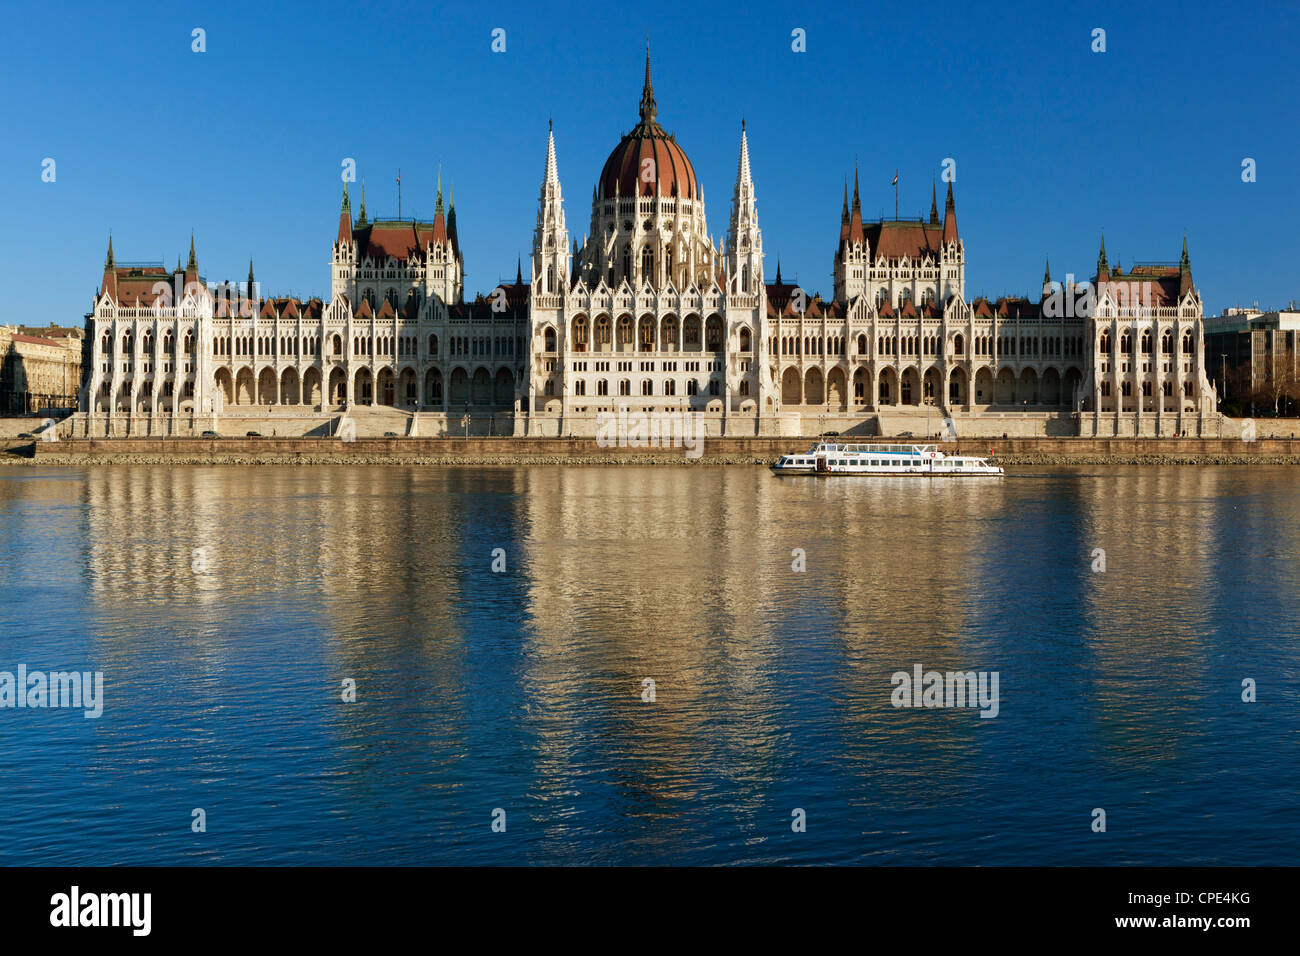 The Parliament (Orszaghaz) across River Danube at sunset, UNESCO World Heritage Site, Budapest, Hungary, Europe Stock Photo